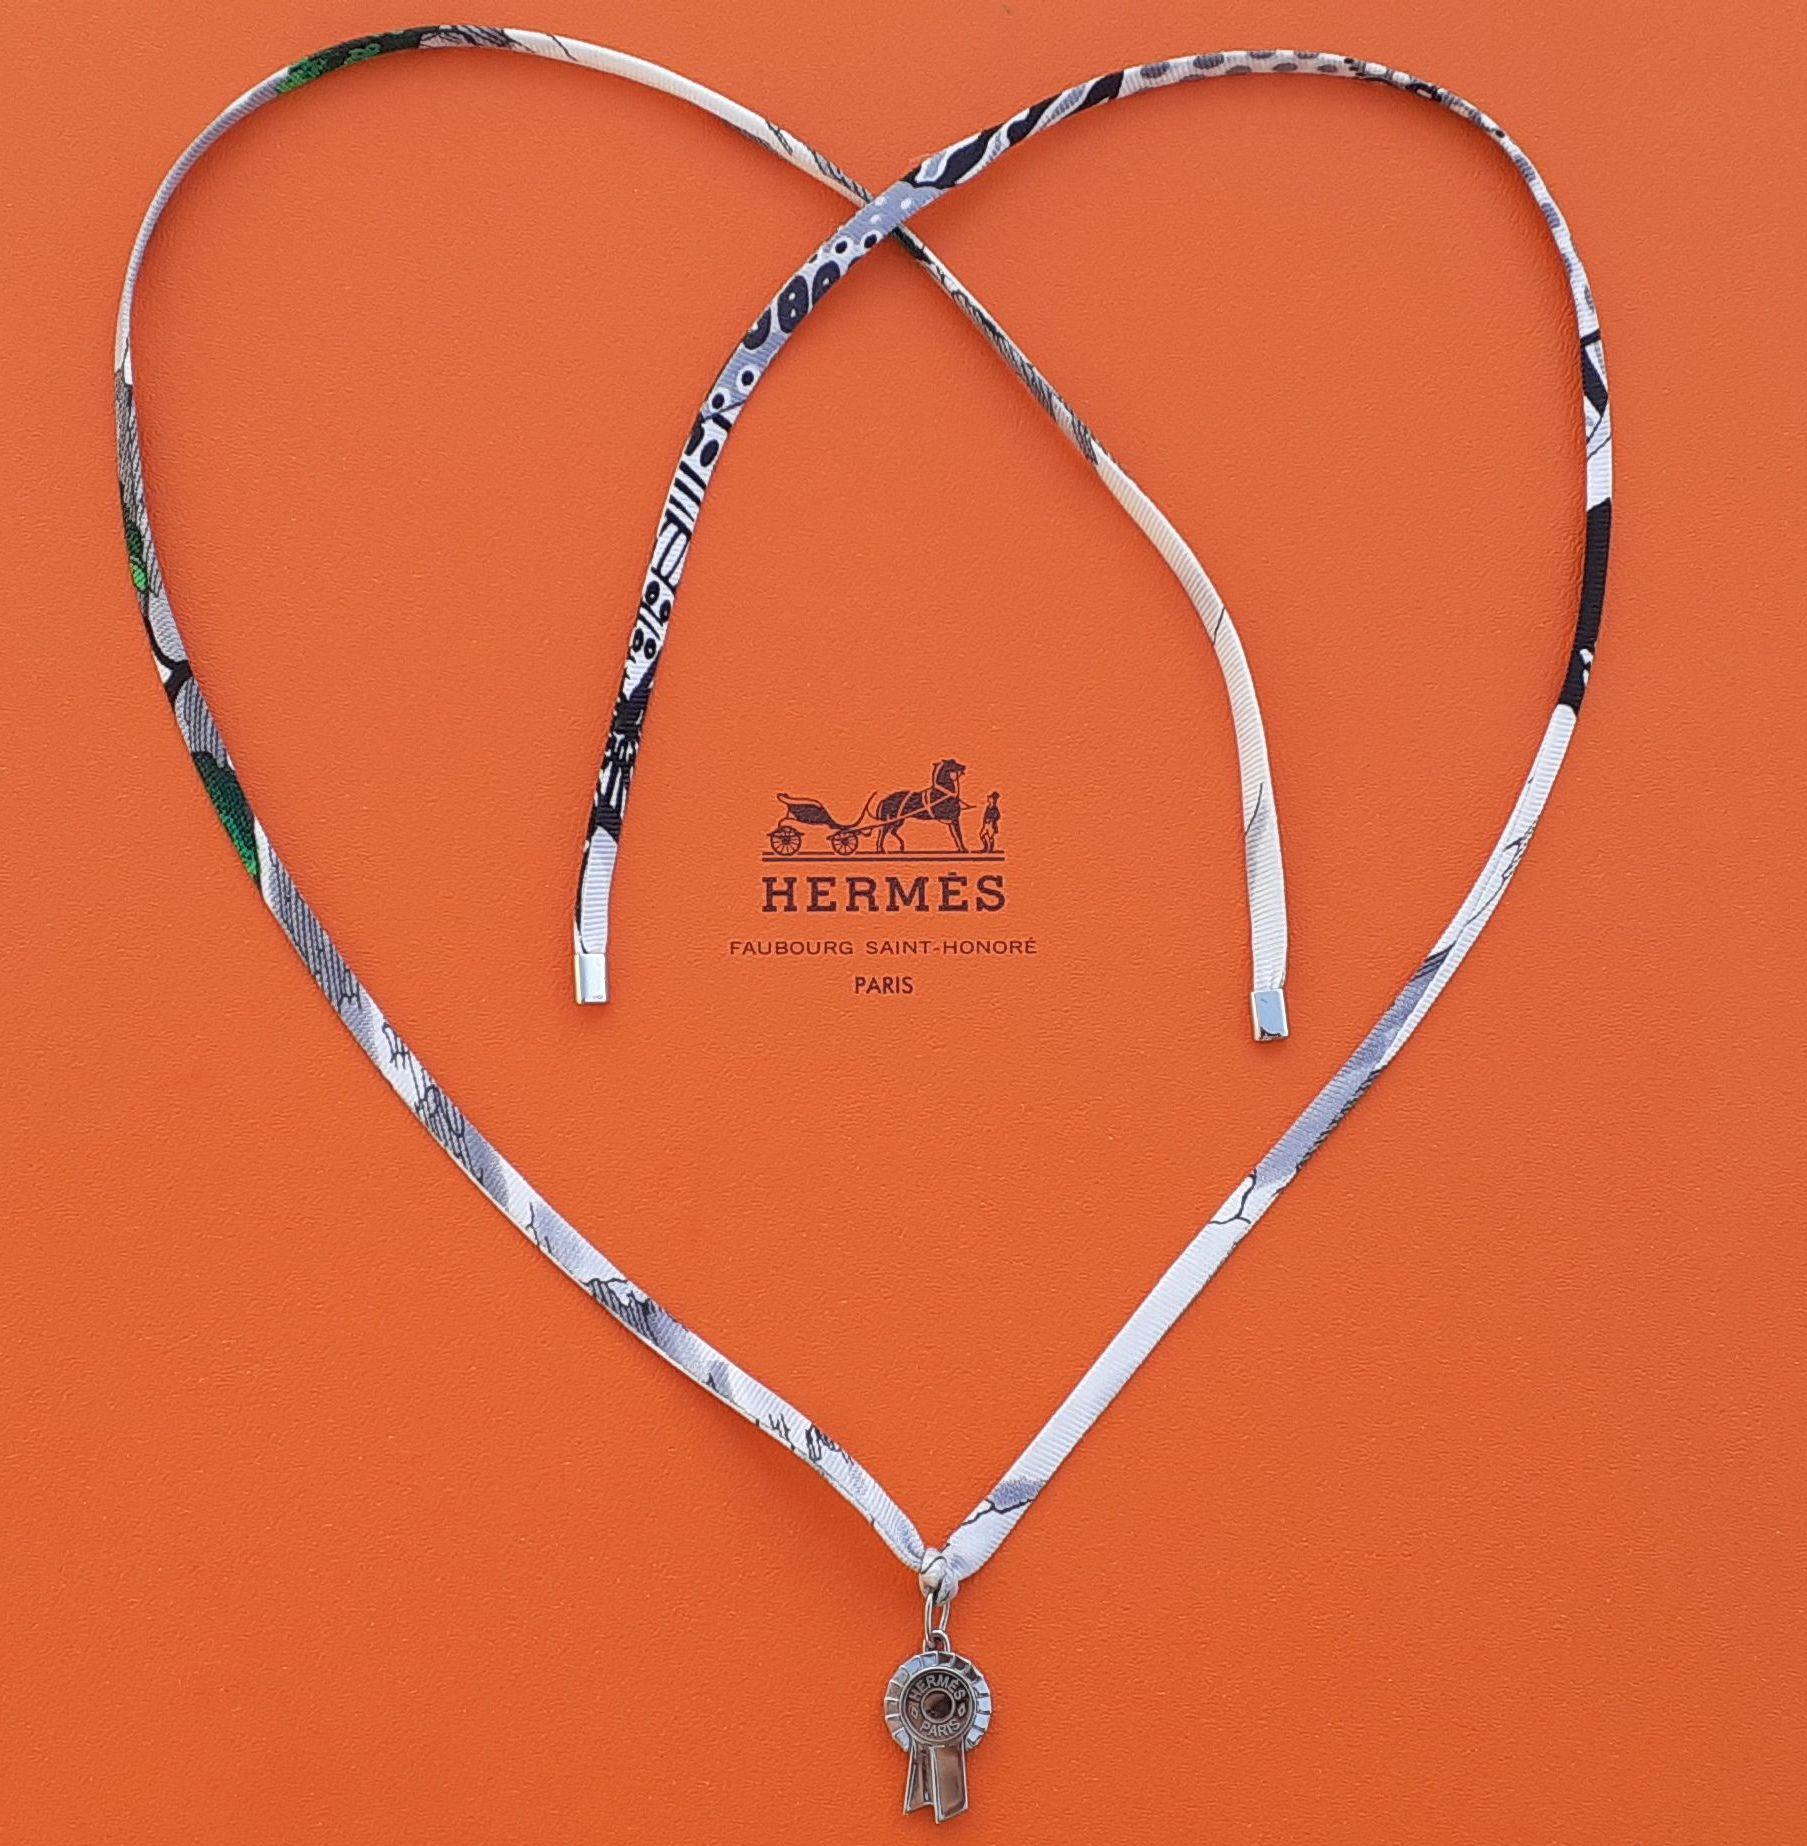 Cute Authentic Hermès Necklace

Pendant in shape of a horse show ribbon

Necklace made of silk / Pendant made of palladium plated hardware (silver-tone)

Pendant can be removed from the silk link and used as a charm

Top of the pendant is in shape